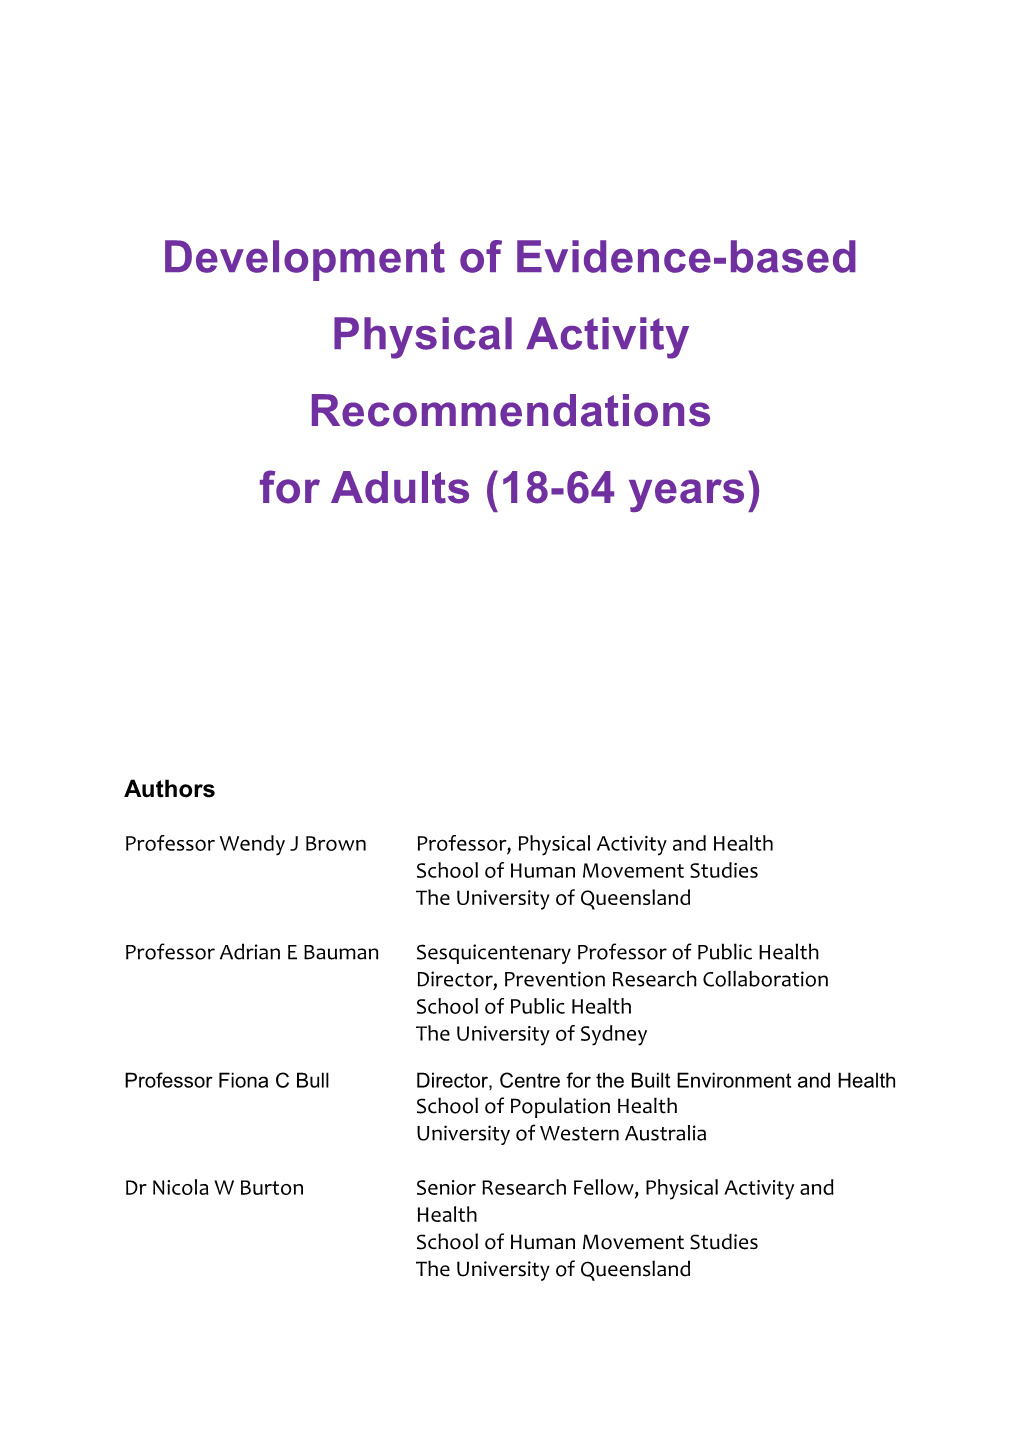 Development of Evidence-Based Physical Activity Recommendations for Adults(18-64 Years)